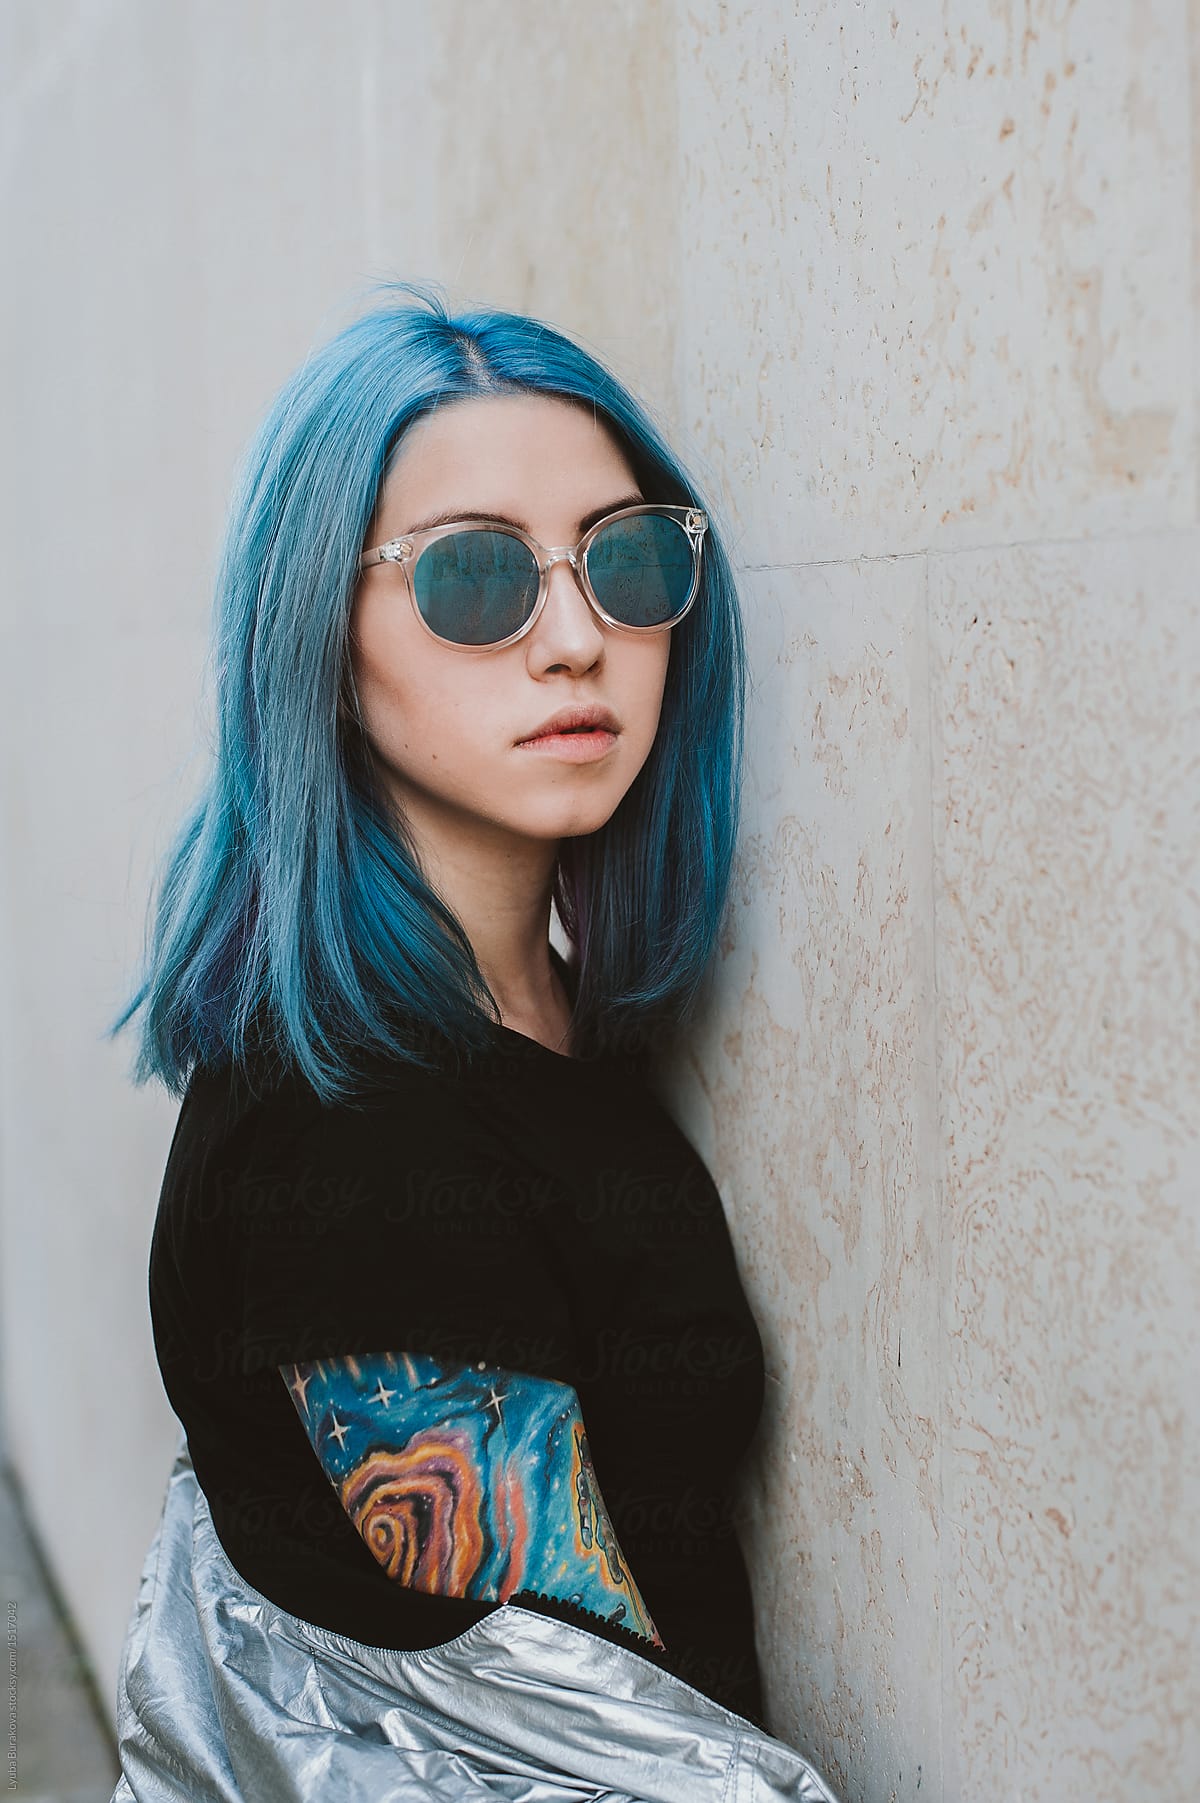 Girl With Bright Blue Hair And Tattoo Standing Against The Wall By Lyuba Burakova Hairstyle Sunglasses Stocksy United